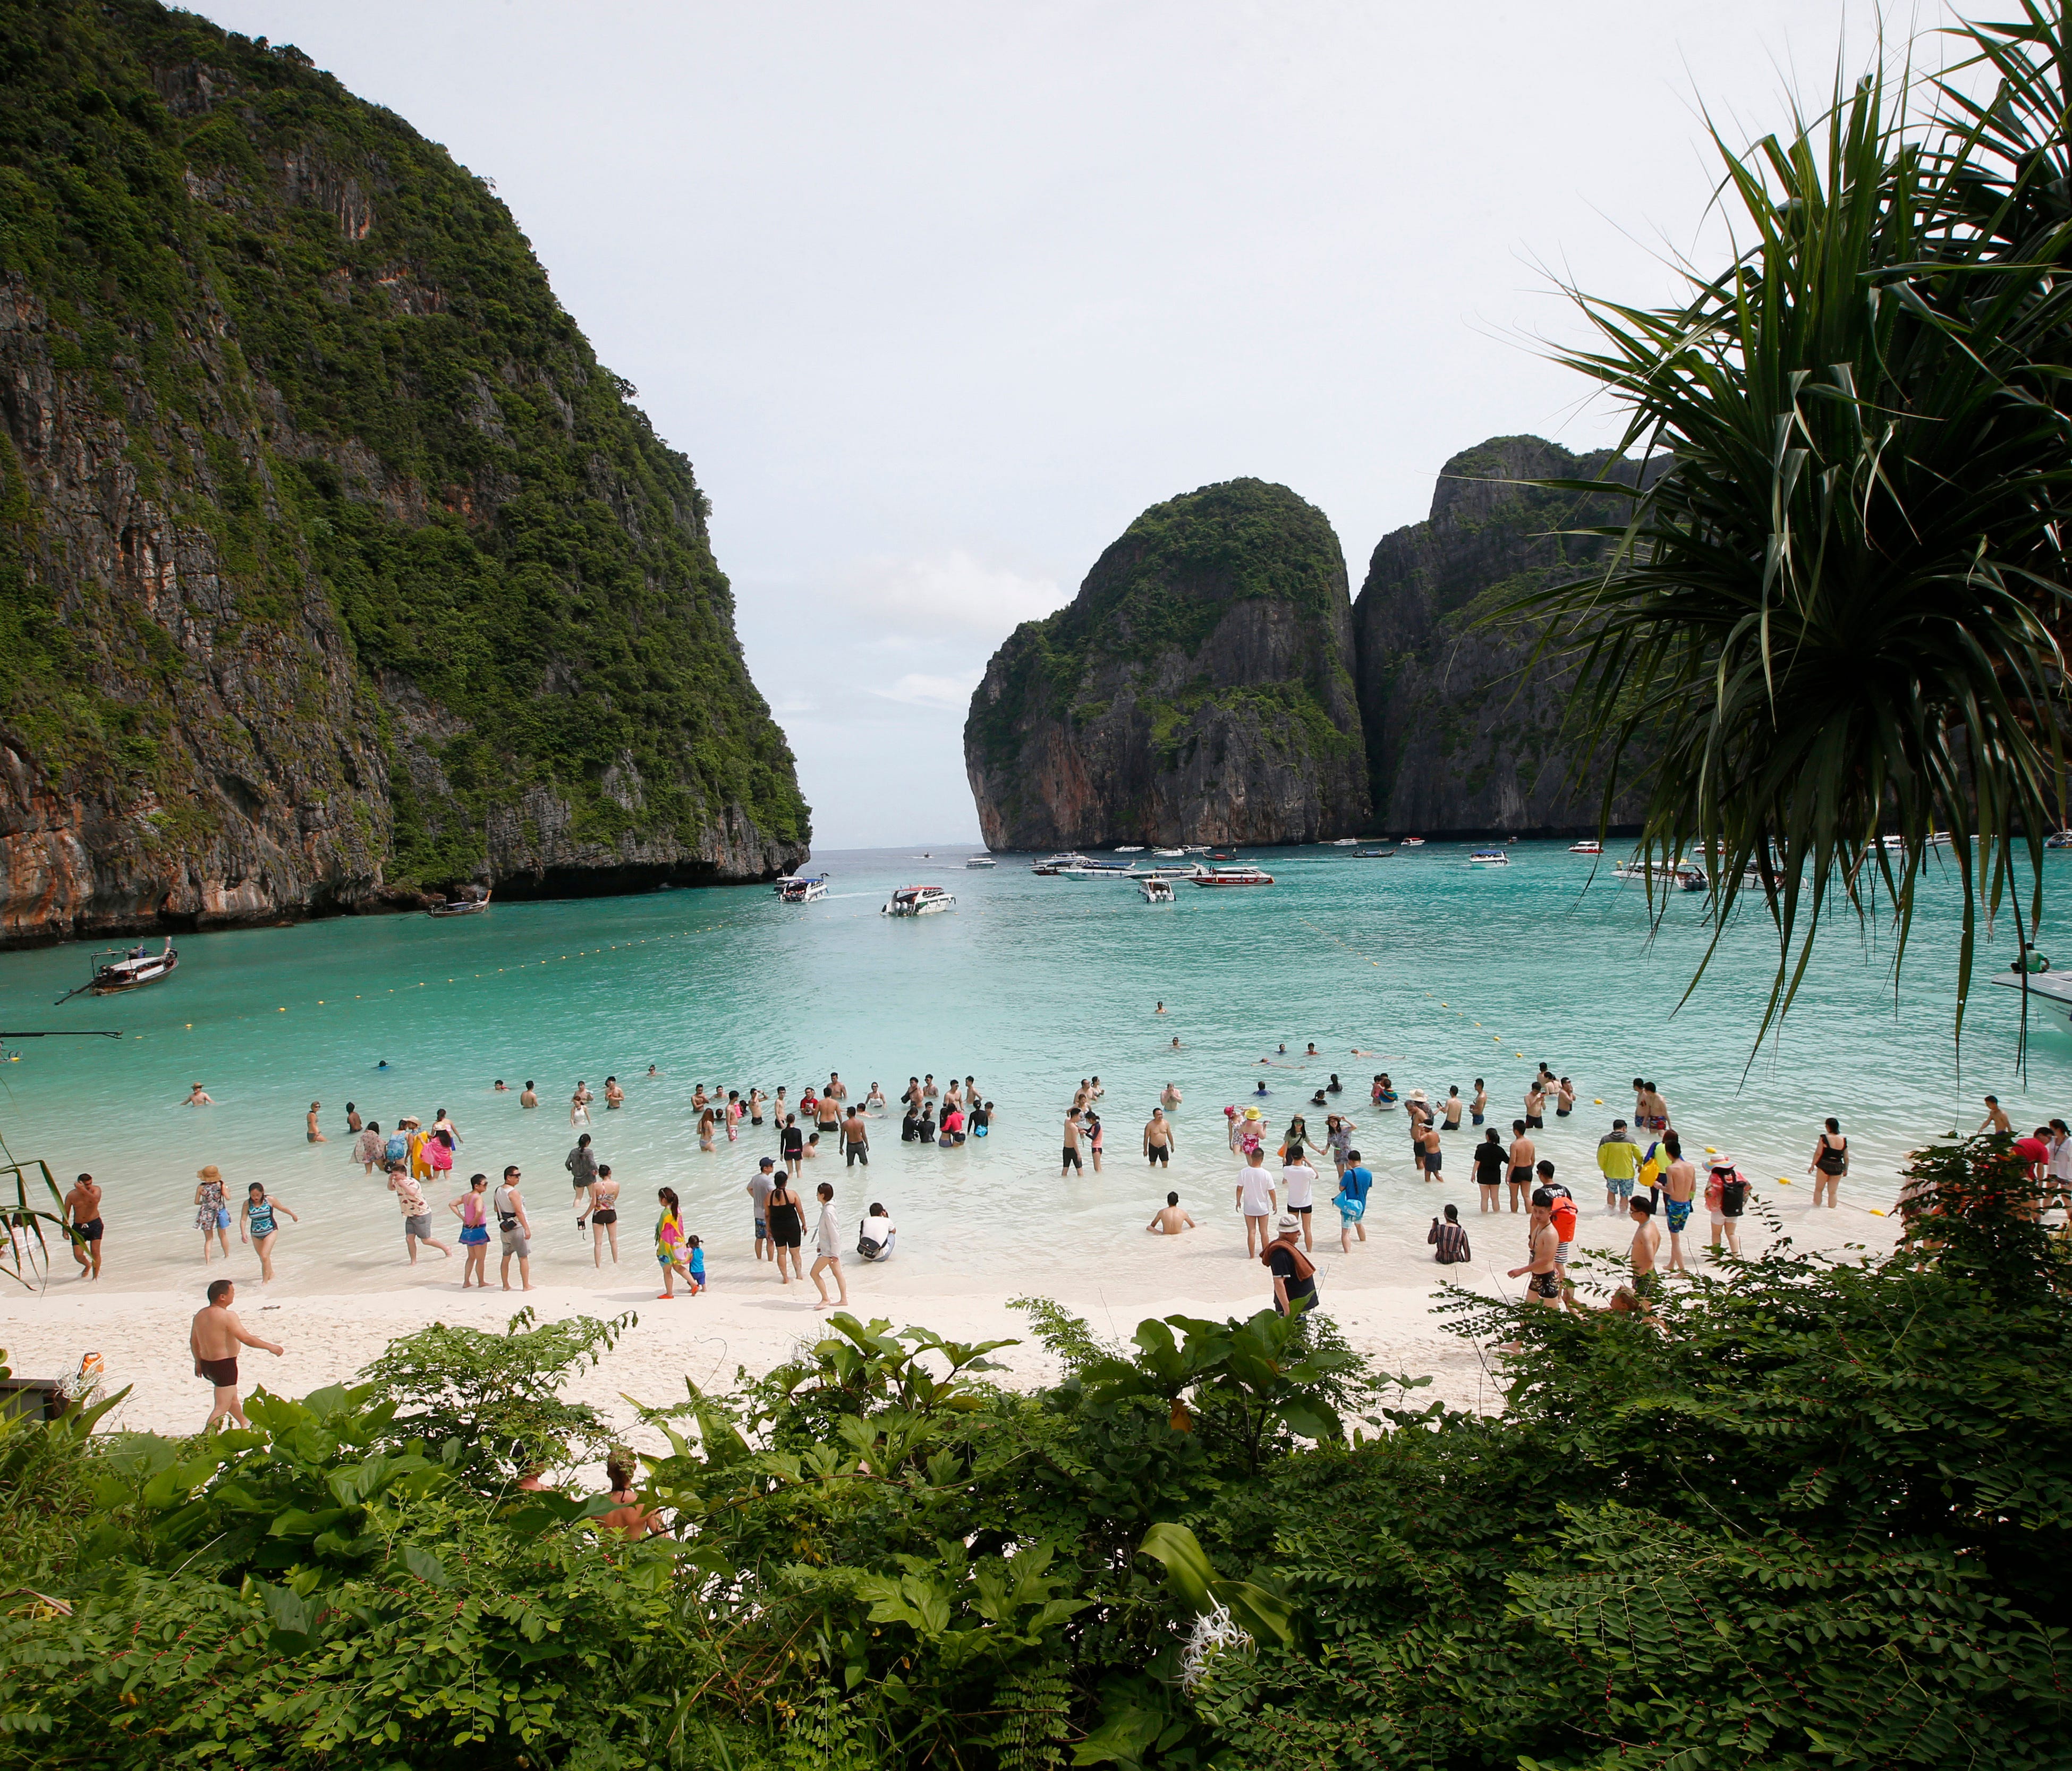 Tourists walk the beach of Maya Bay in Thailand on May 31, 2018. The popular tourist destination in the Andaman Sea will close to tourists for four months to give its coral reefs and sea life a chance to recover from an onslaught that began nearly tw